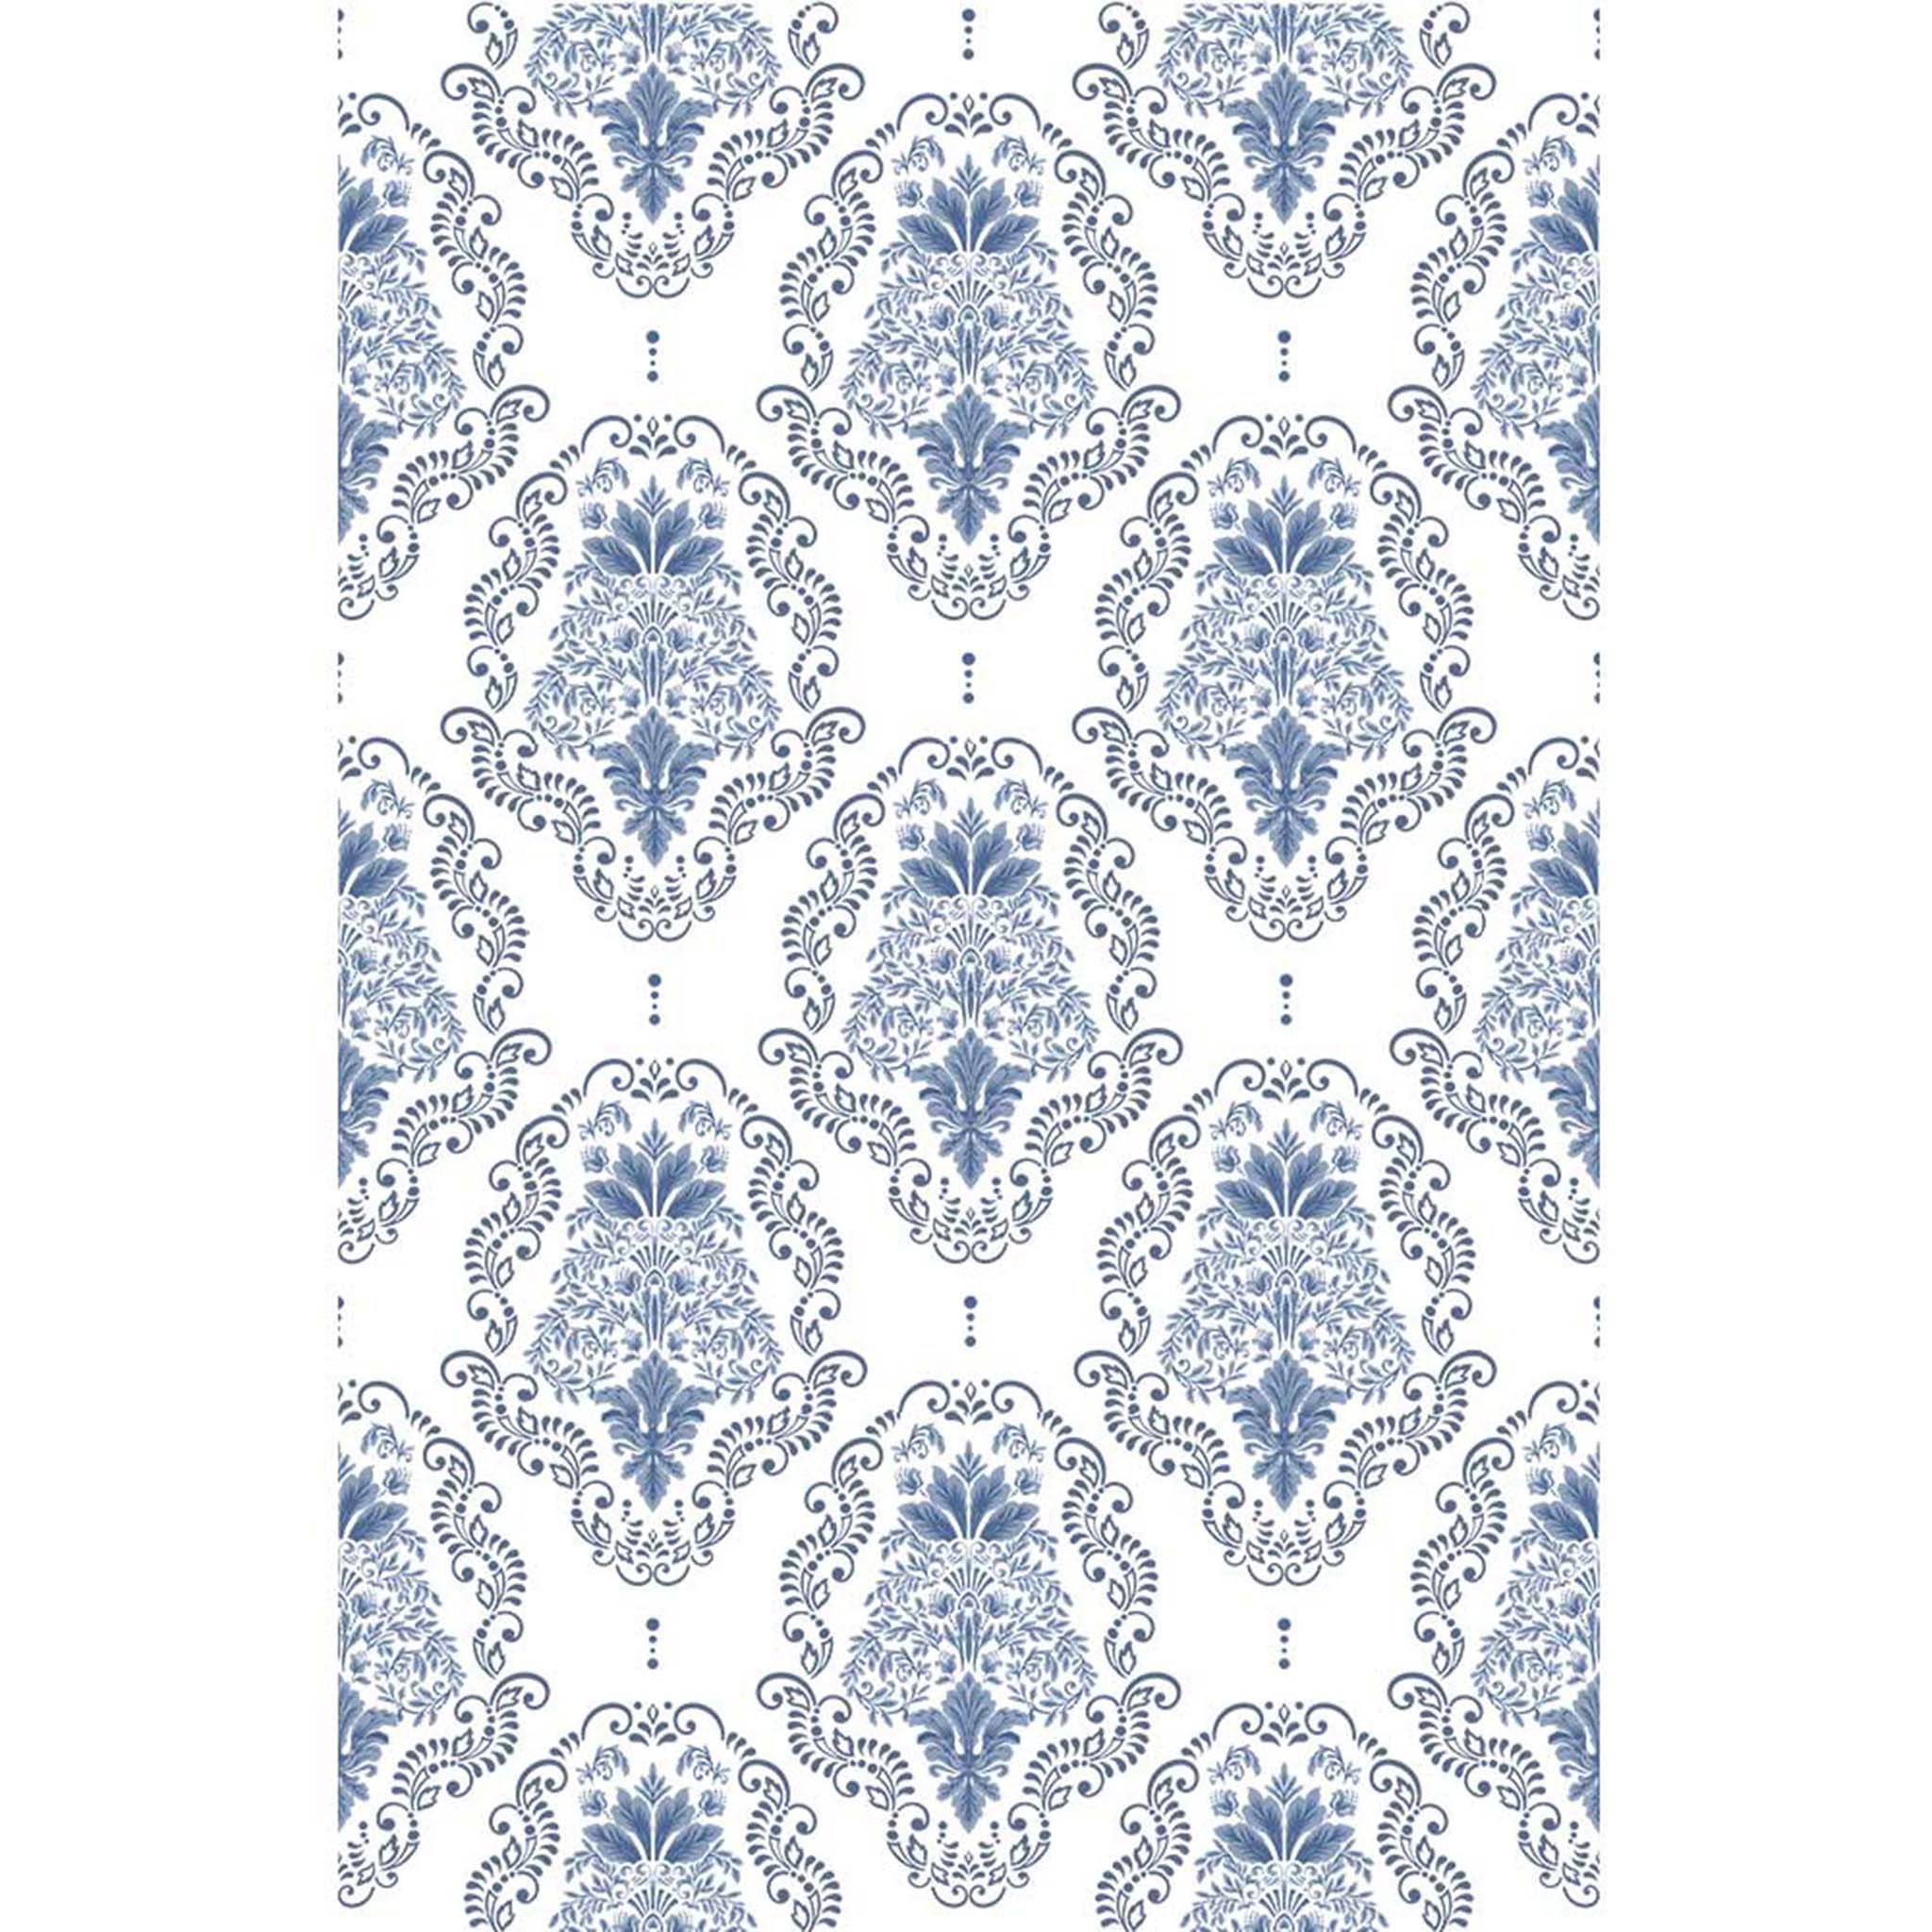 Rub-on transfer of a delicate blue damask design.